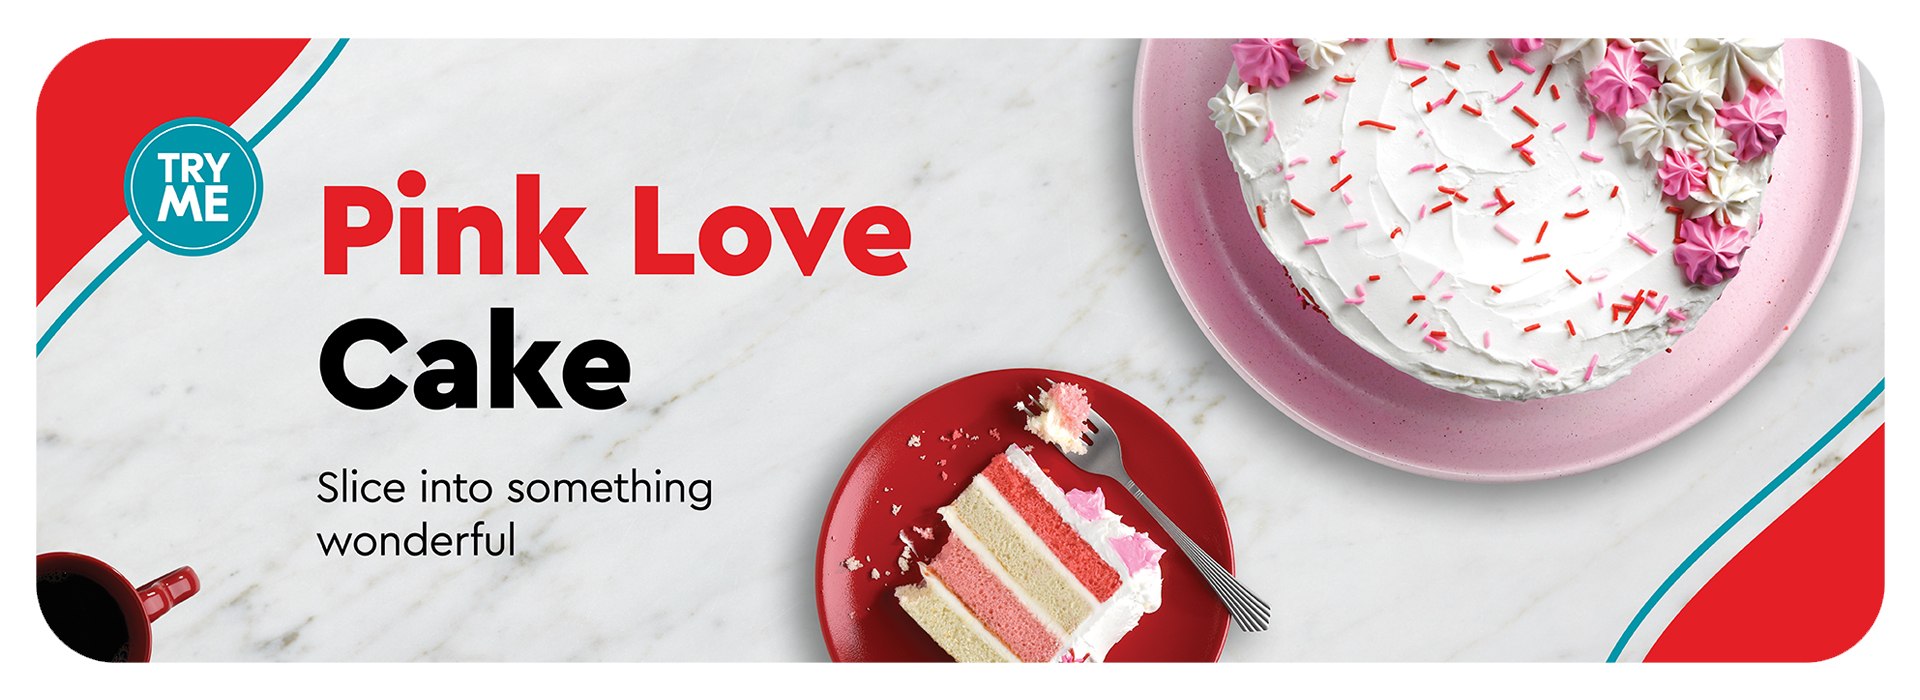 Text Reading 'Pink Love Cake with a picture of an uncut cake and a cake slice having red, yellow, and pink bread and white cream saying 'Try Me' and 'Slice into something wonderful'.